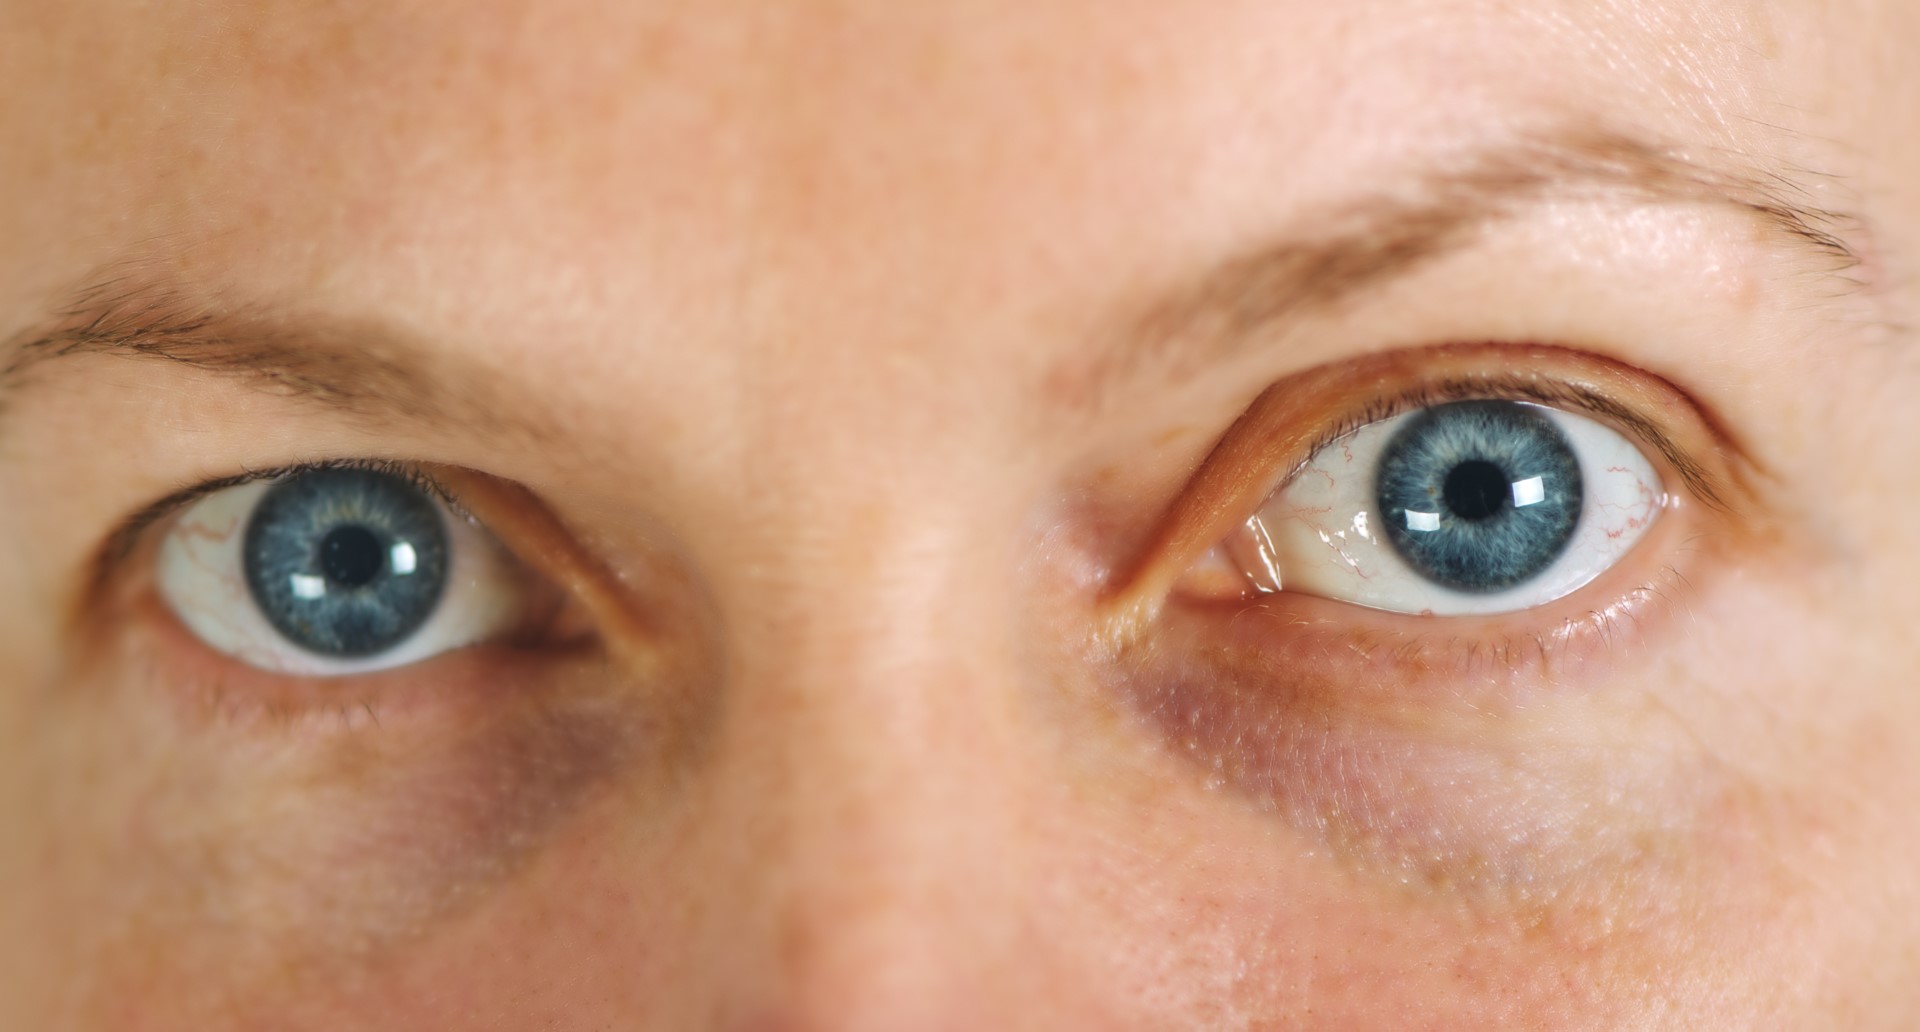 Woman with big blue eyes suffering from glaucoma, a damage in the eye optic nerve. This may lead to gradual loss of vision.